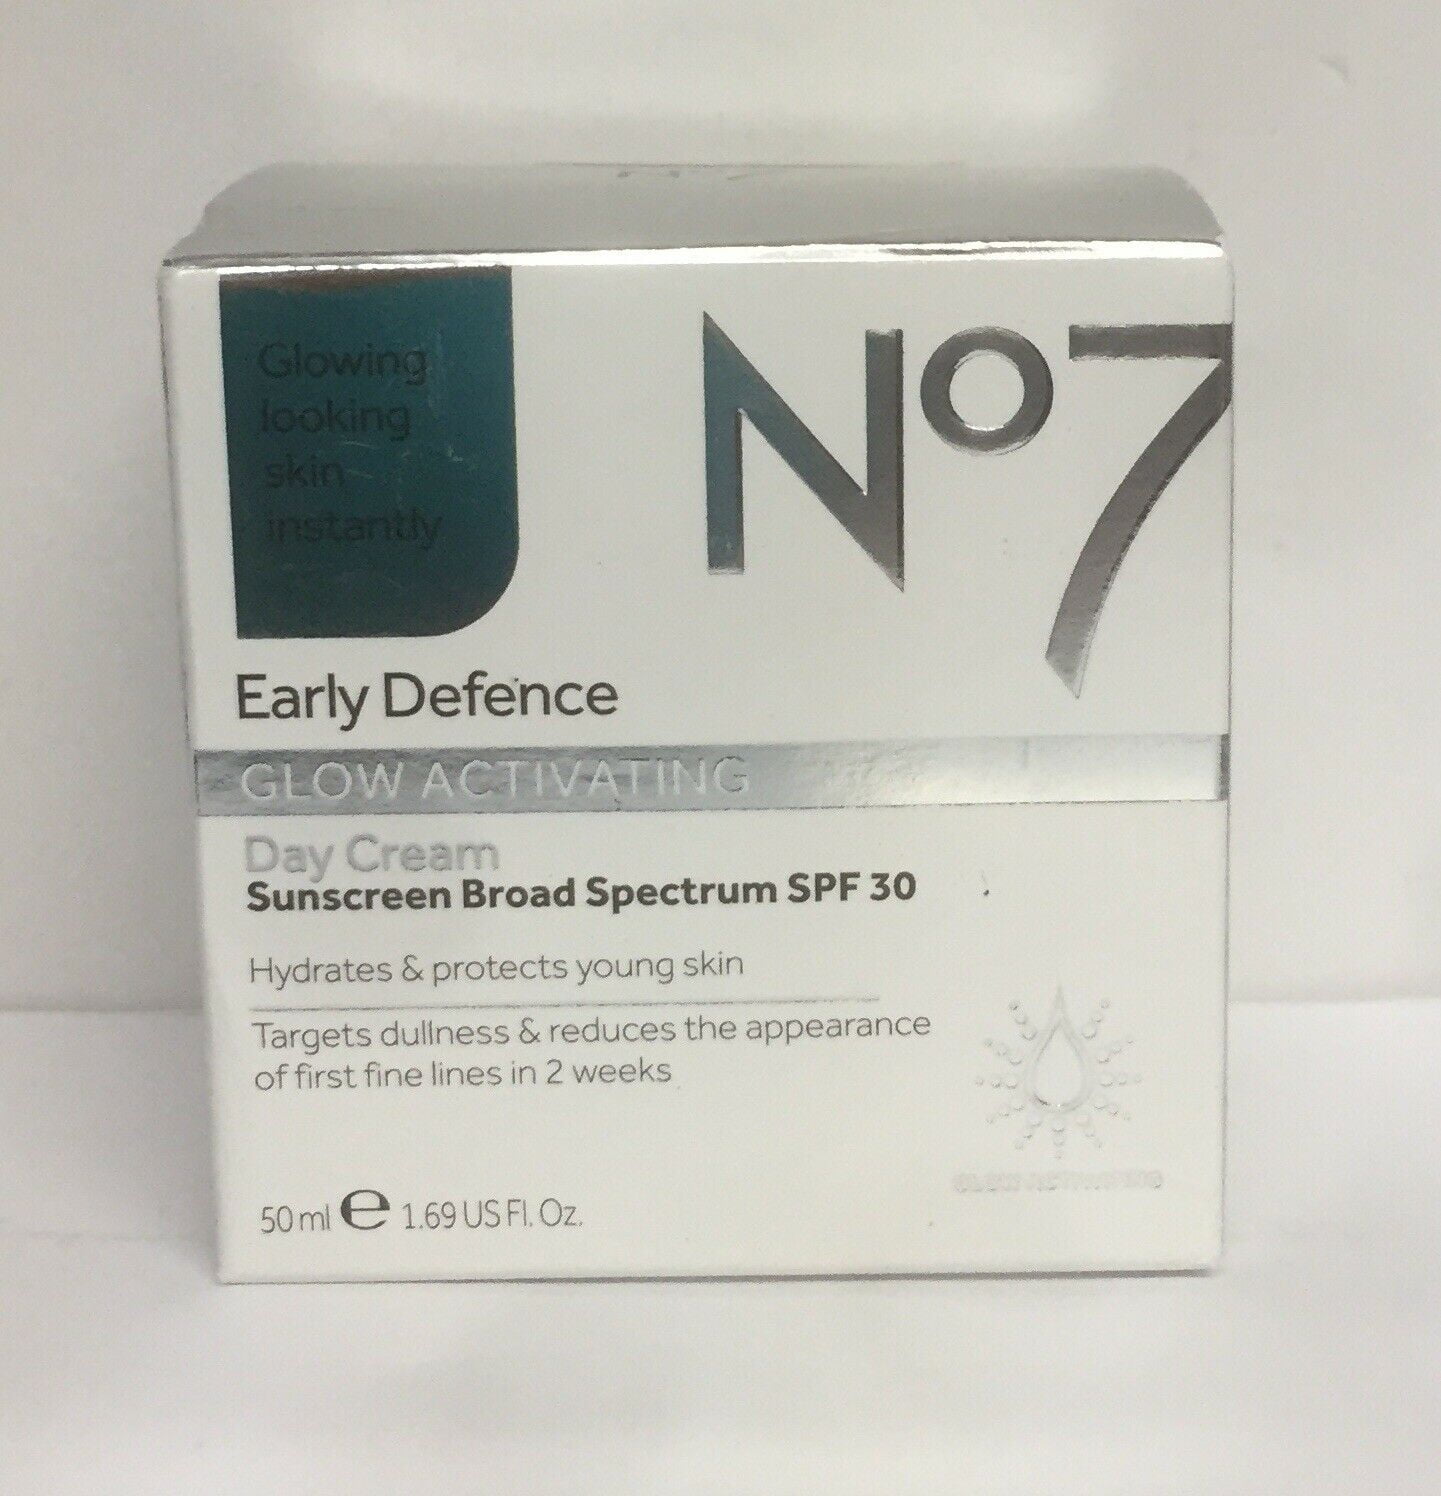 No.7 Early Defence Glow Activating Day Cream SPF 30 50ml / 1.69 fl.oz.